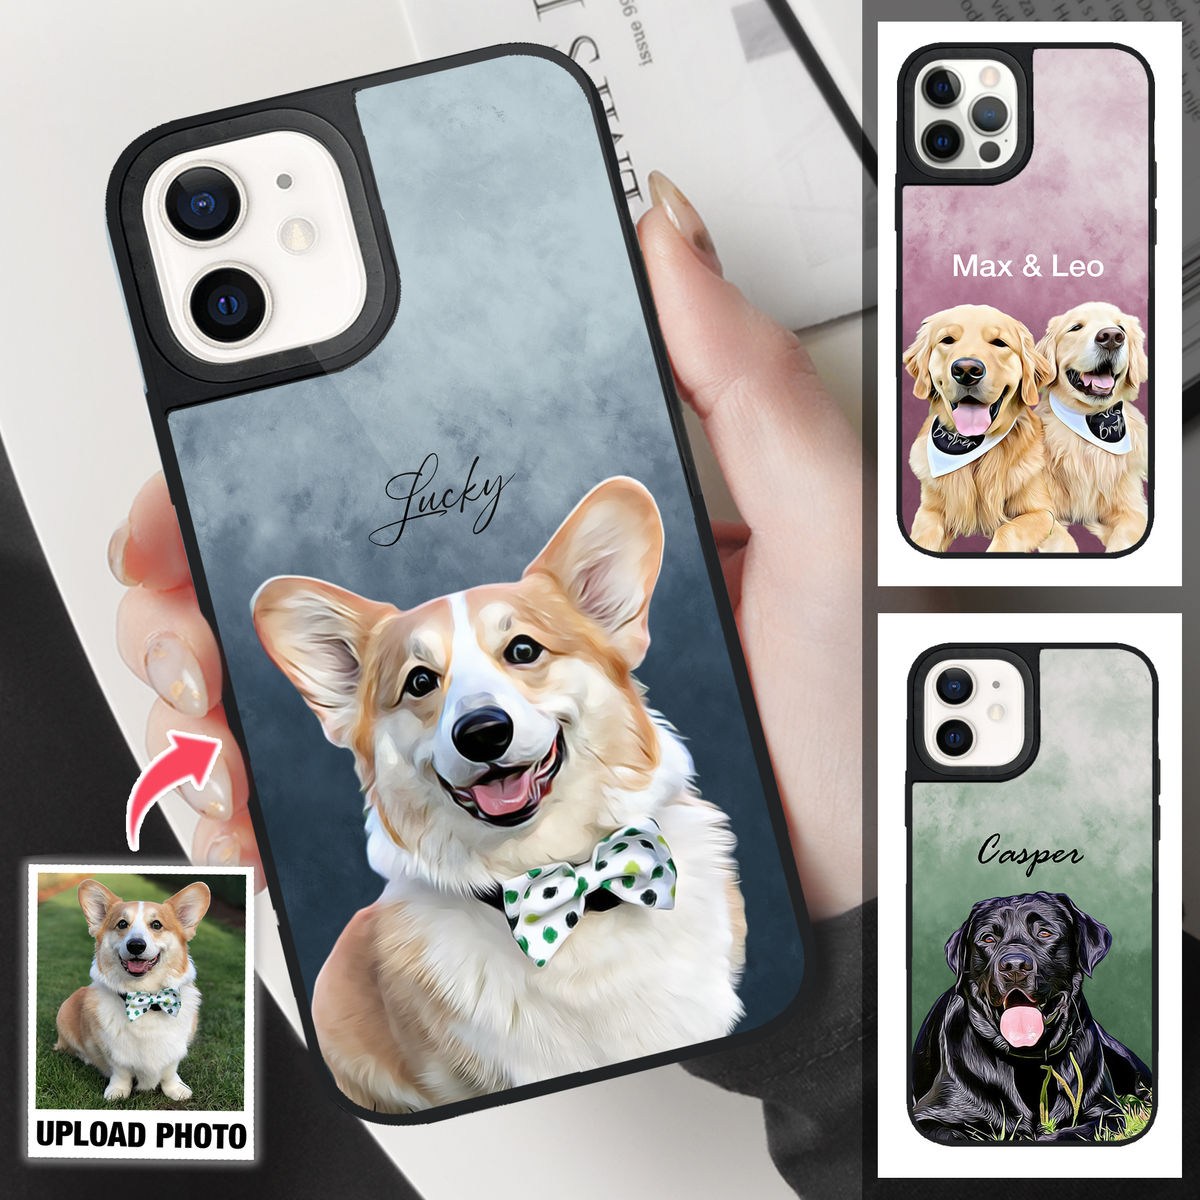 Custom Phone Case From Photo - iPhone Case - Pet Lover Gifts - Dog Portrait - Digital Oil Painting (B)_1